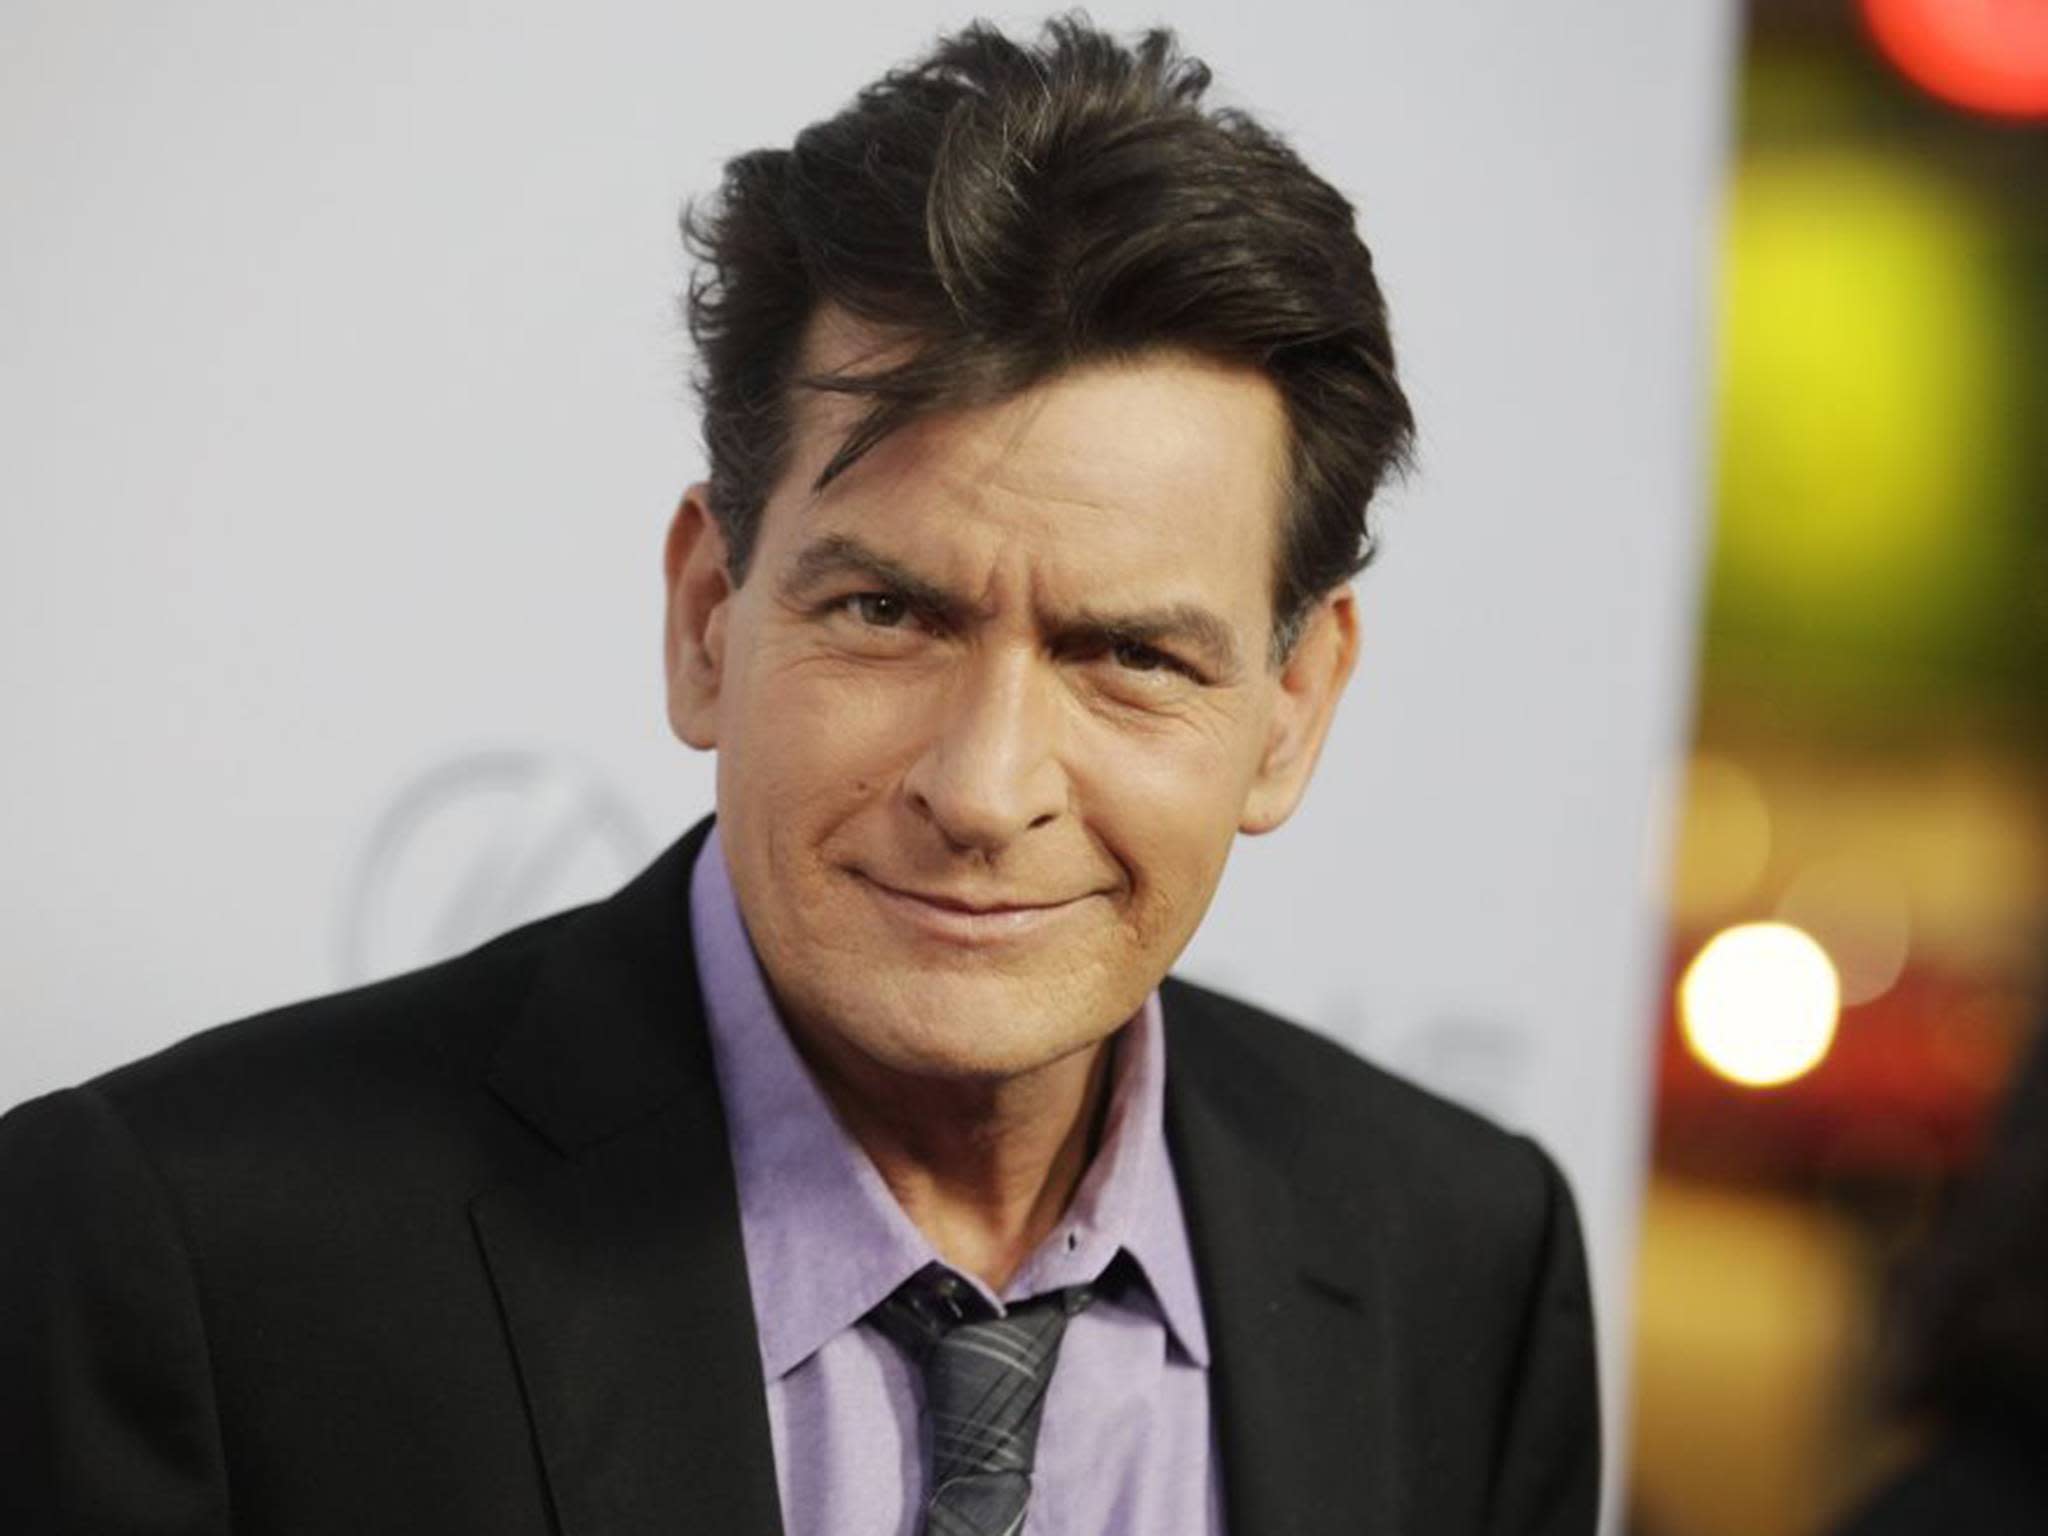 Youngest Porn Ever - Charlie Sheen watched gay porn claims Denise Richards